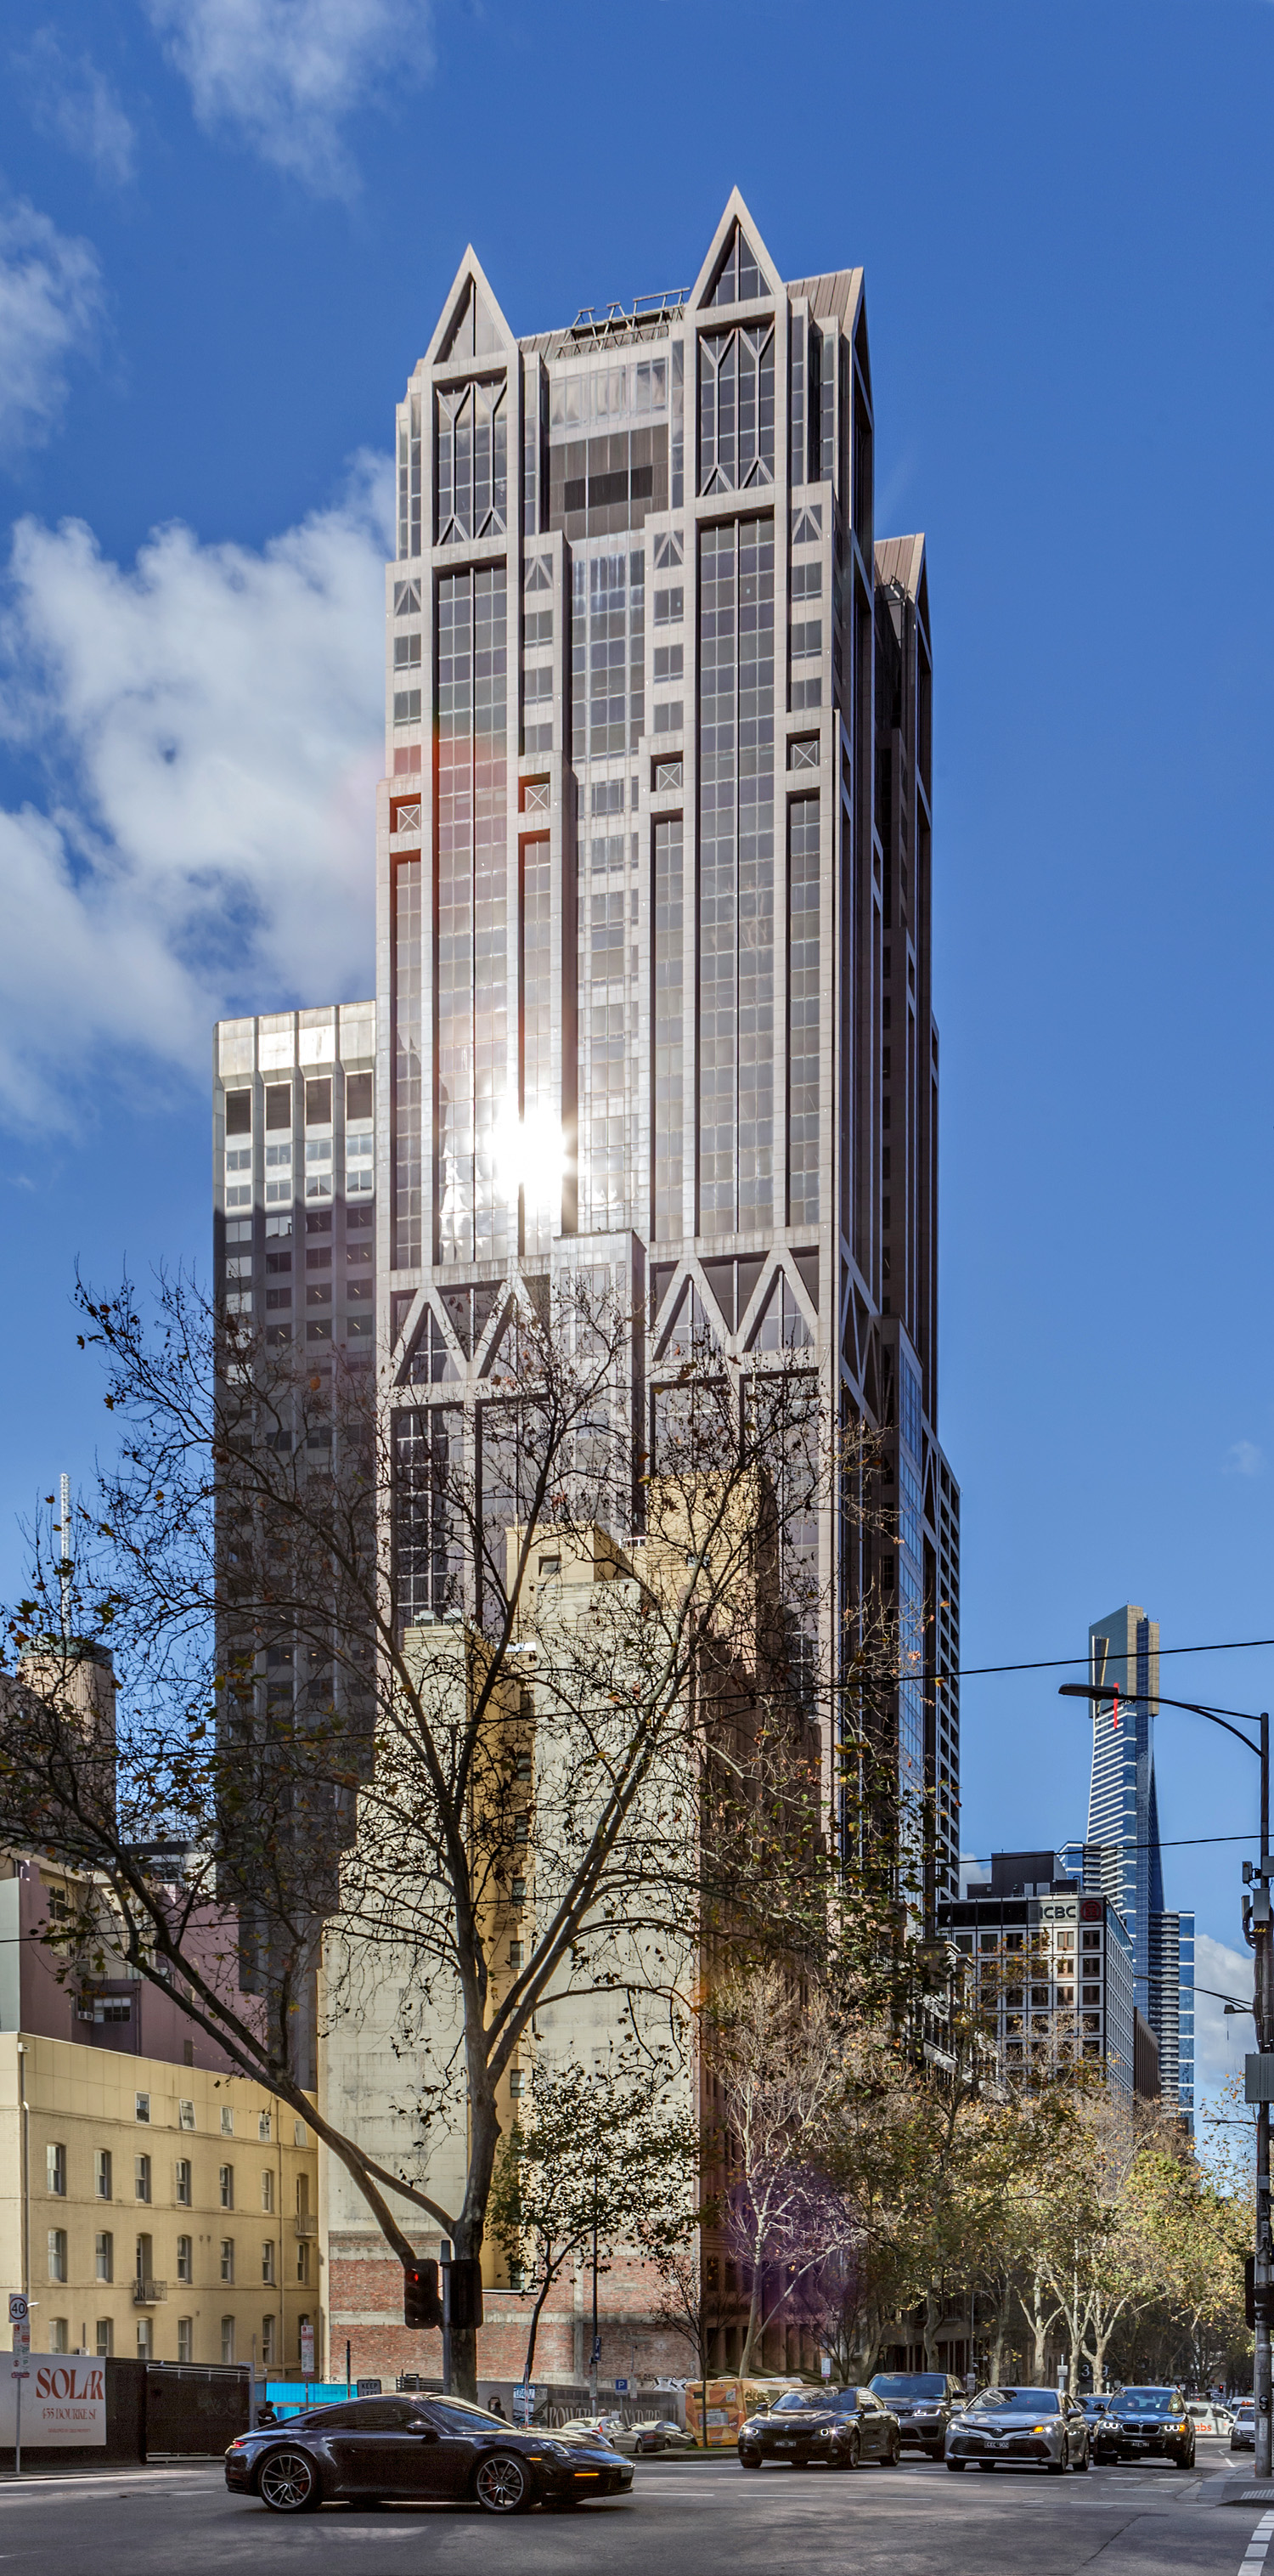 100 Queen Street, Melbourne - View from the northeast. © Mathias Beinling